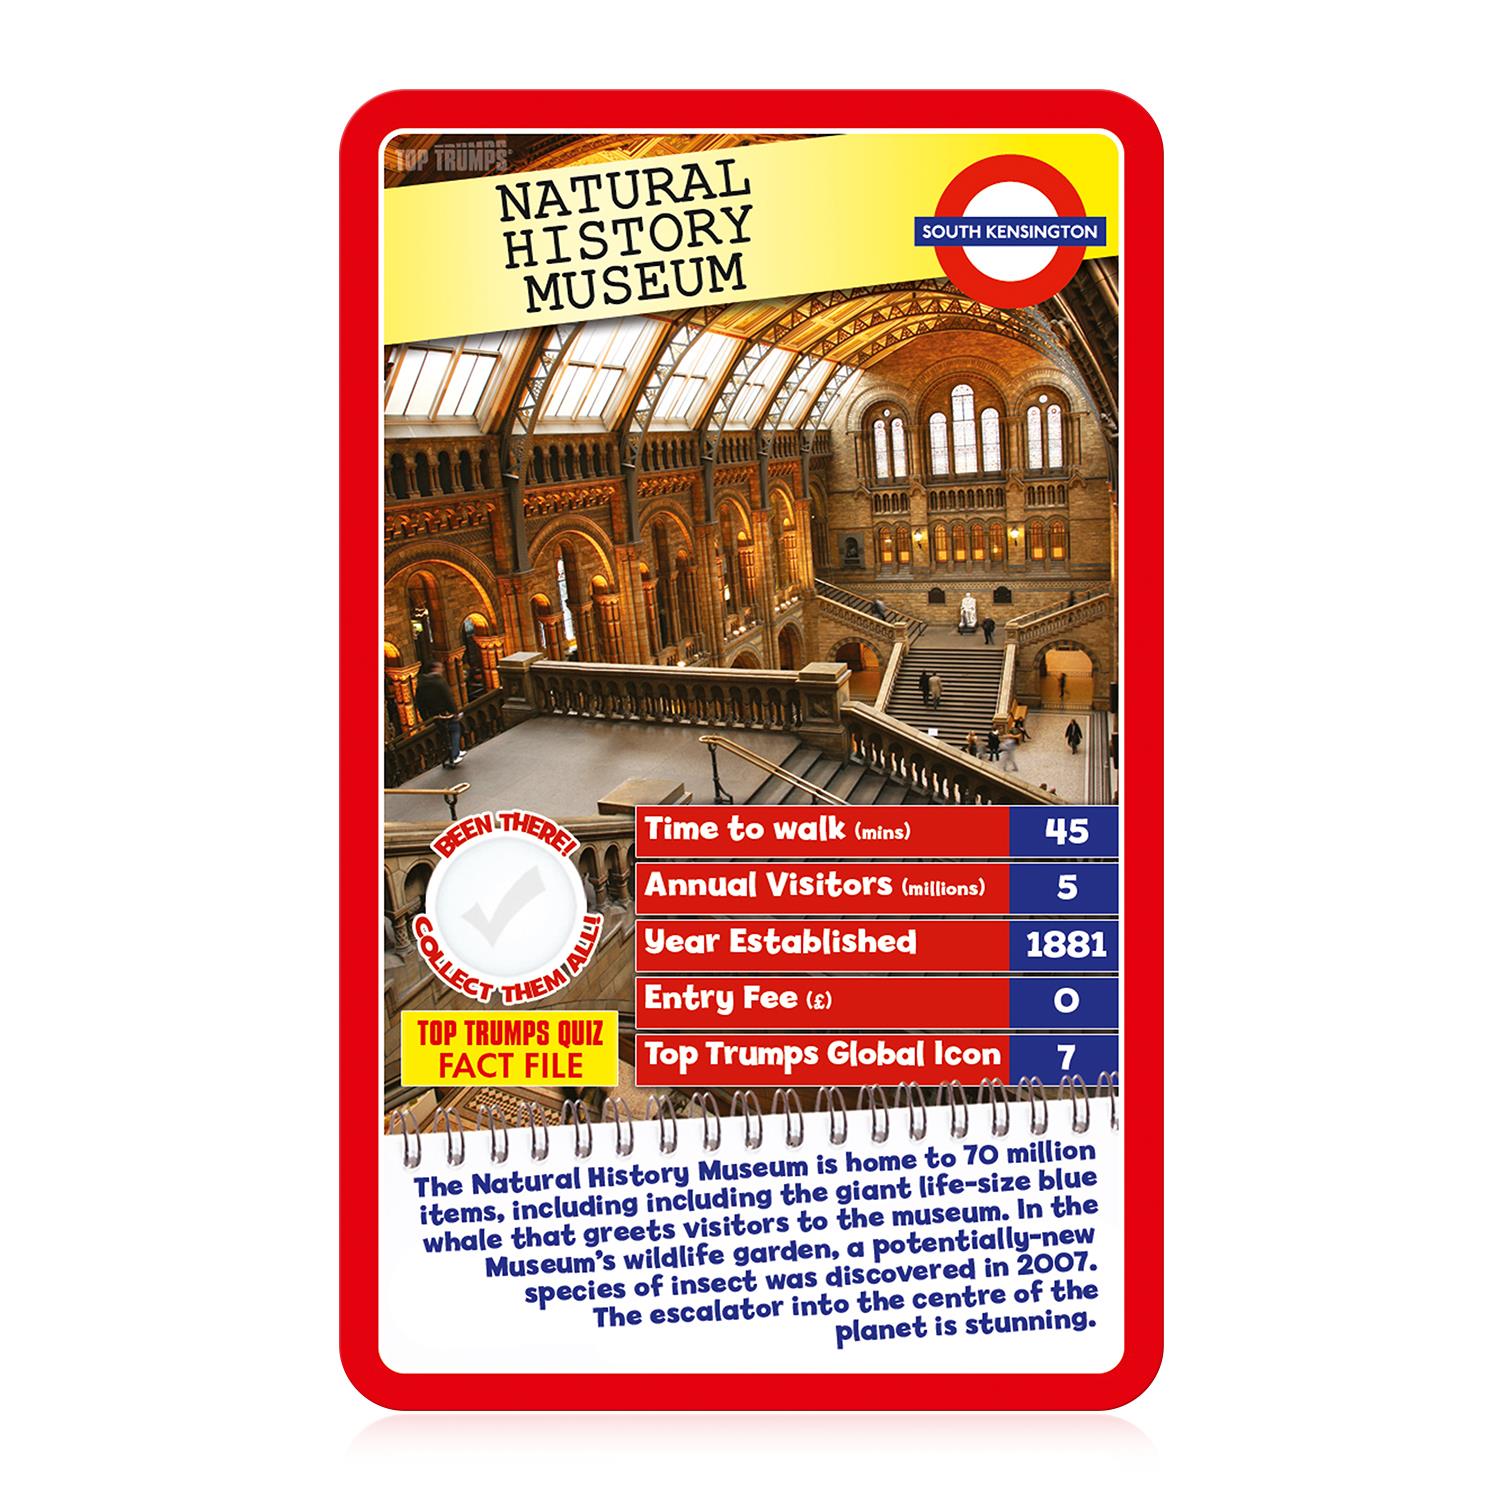 London 30 Things to See Top Trumps Card Game